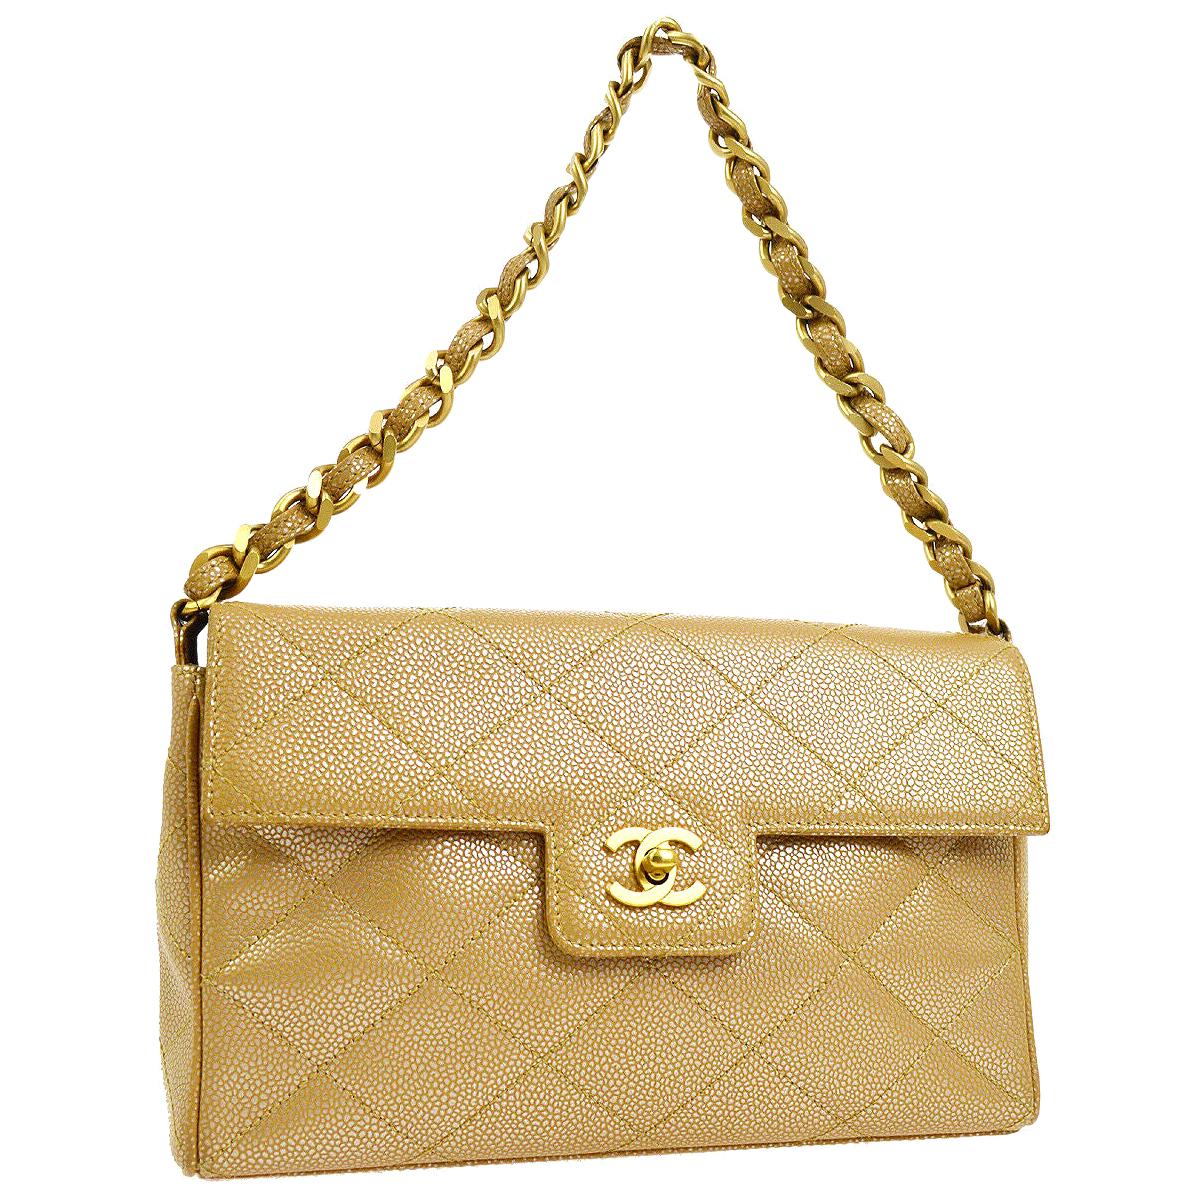 Chanel Tan Nude Caviar Leather Gold Iridescent Evening Shoulder Flap Bag in Box